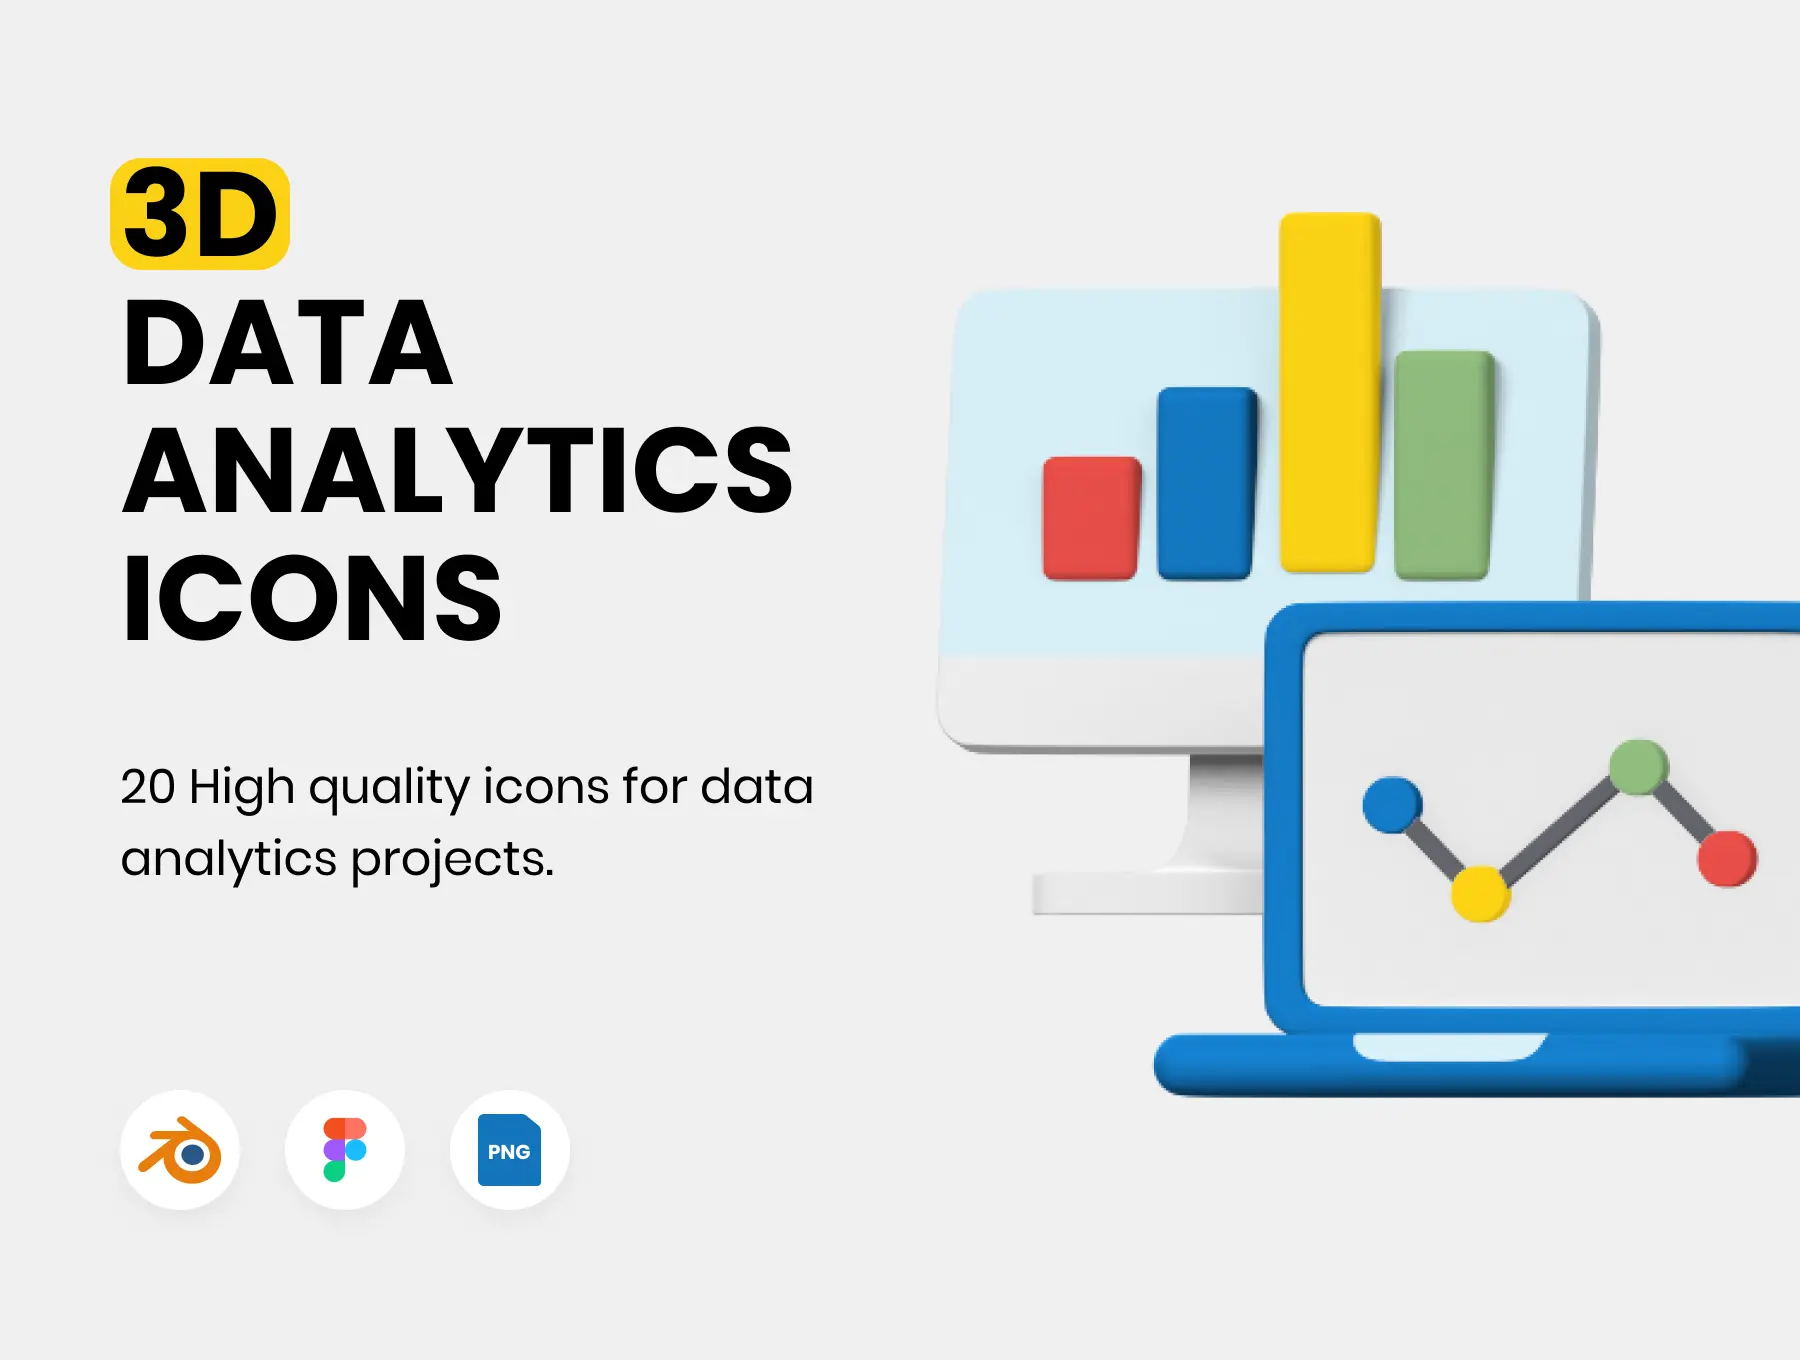 3d-data-analytics-icons-cover_1630126700762